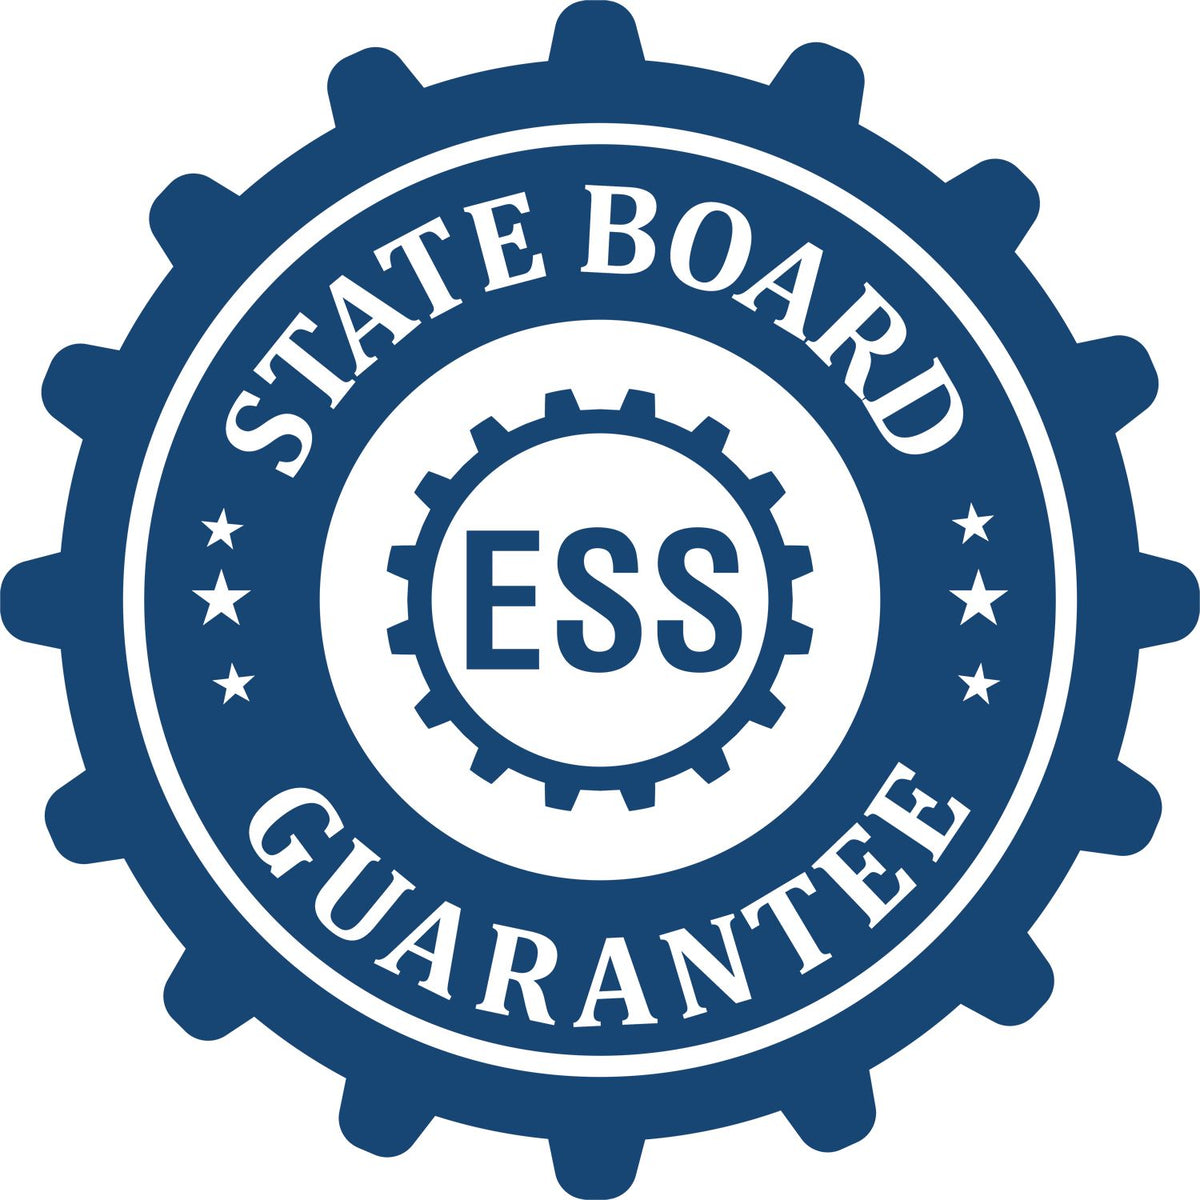 An emblem in a gear shape illustrating a state board guarantee for the Hybrid Colorado Land Surveyor Seal